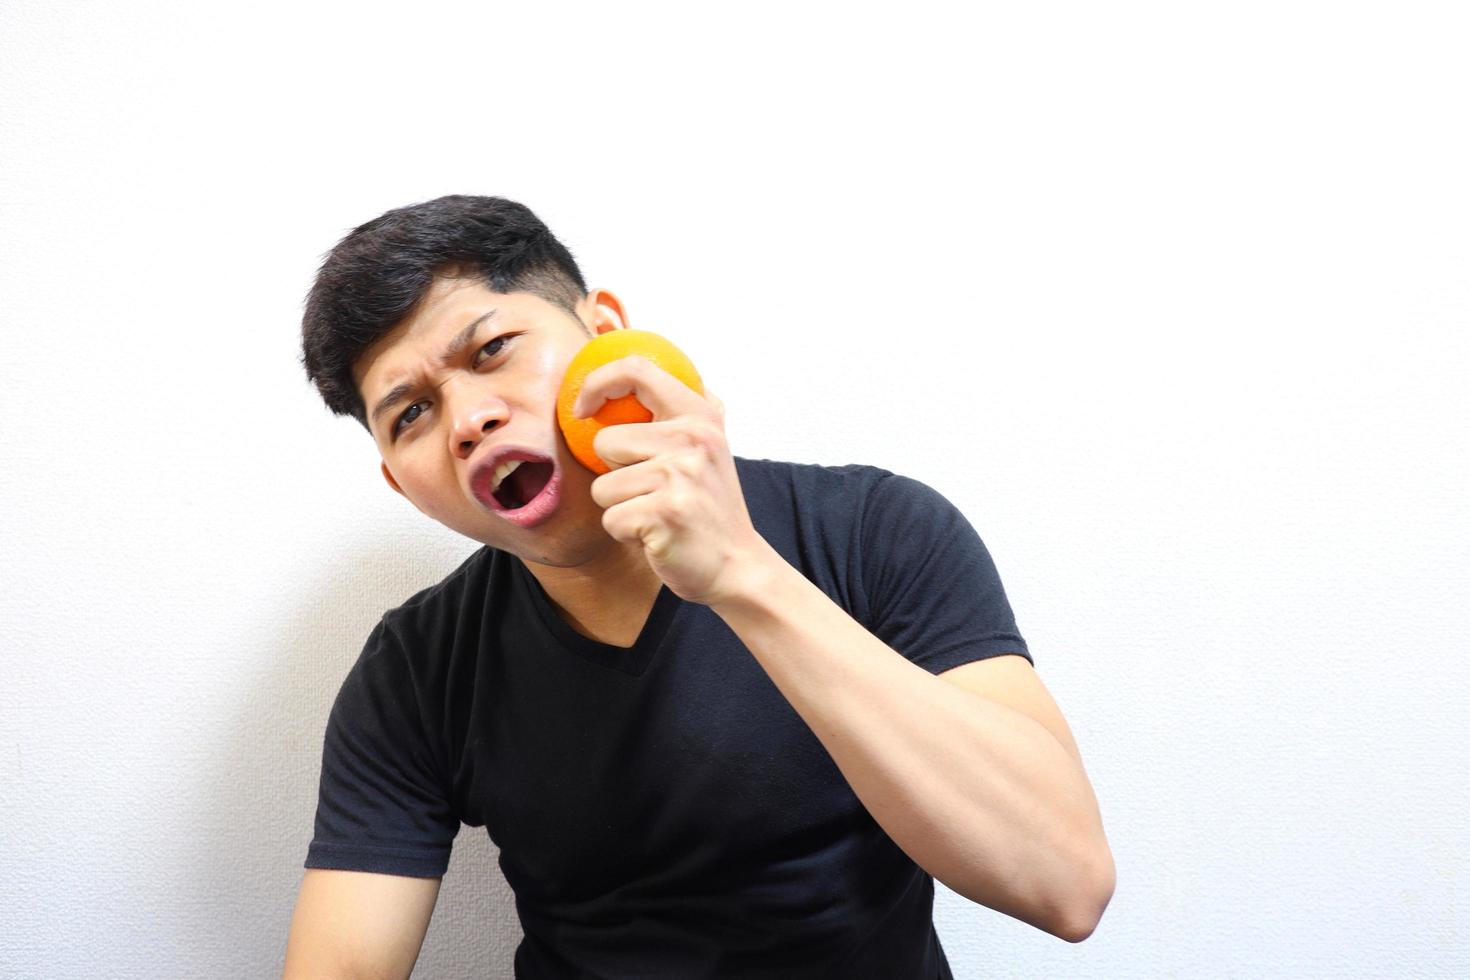 Attractive asian man eating oranges. Isolated on white background photo